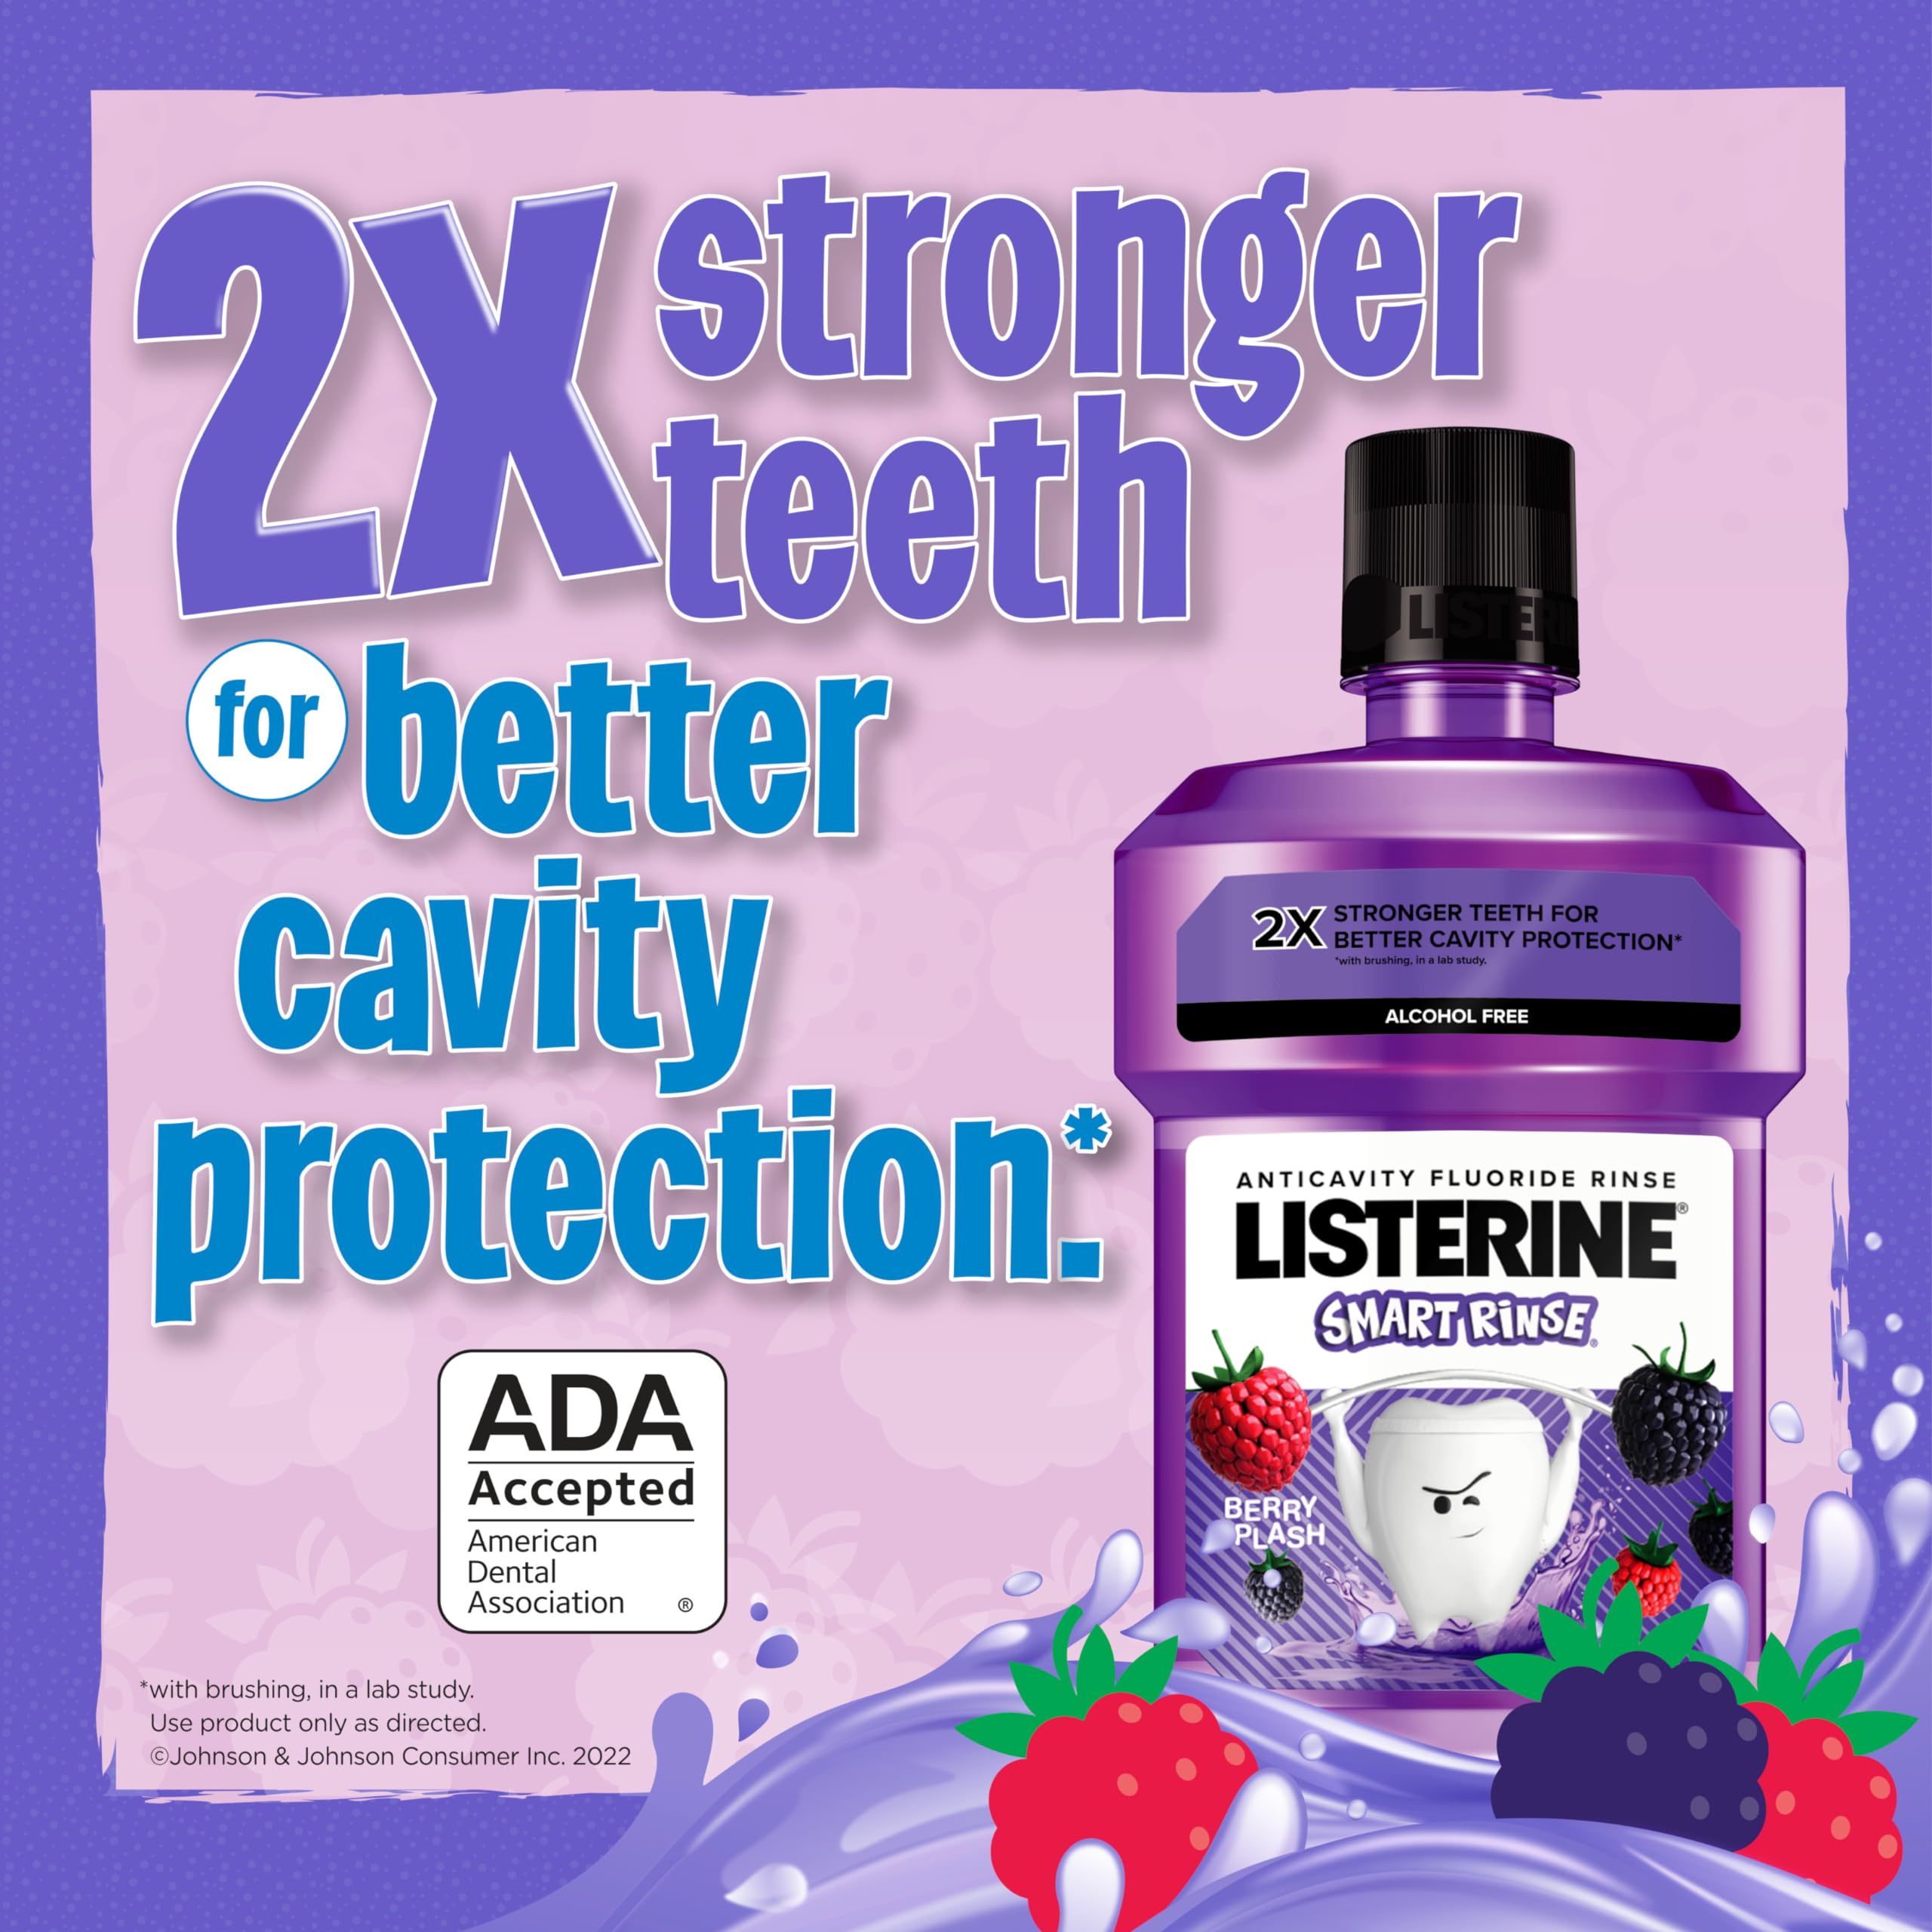 Listerine Smart Rinse Kids Mouthwash, ADA Accepted, Alcohol-Free Anticavity Fluoride Mouthwash, Oral Rinse for Cavity Protection, Berry Splash Flavor for Kids Oral Care, 500 mL